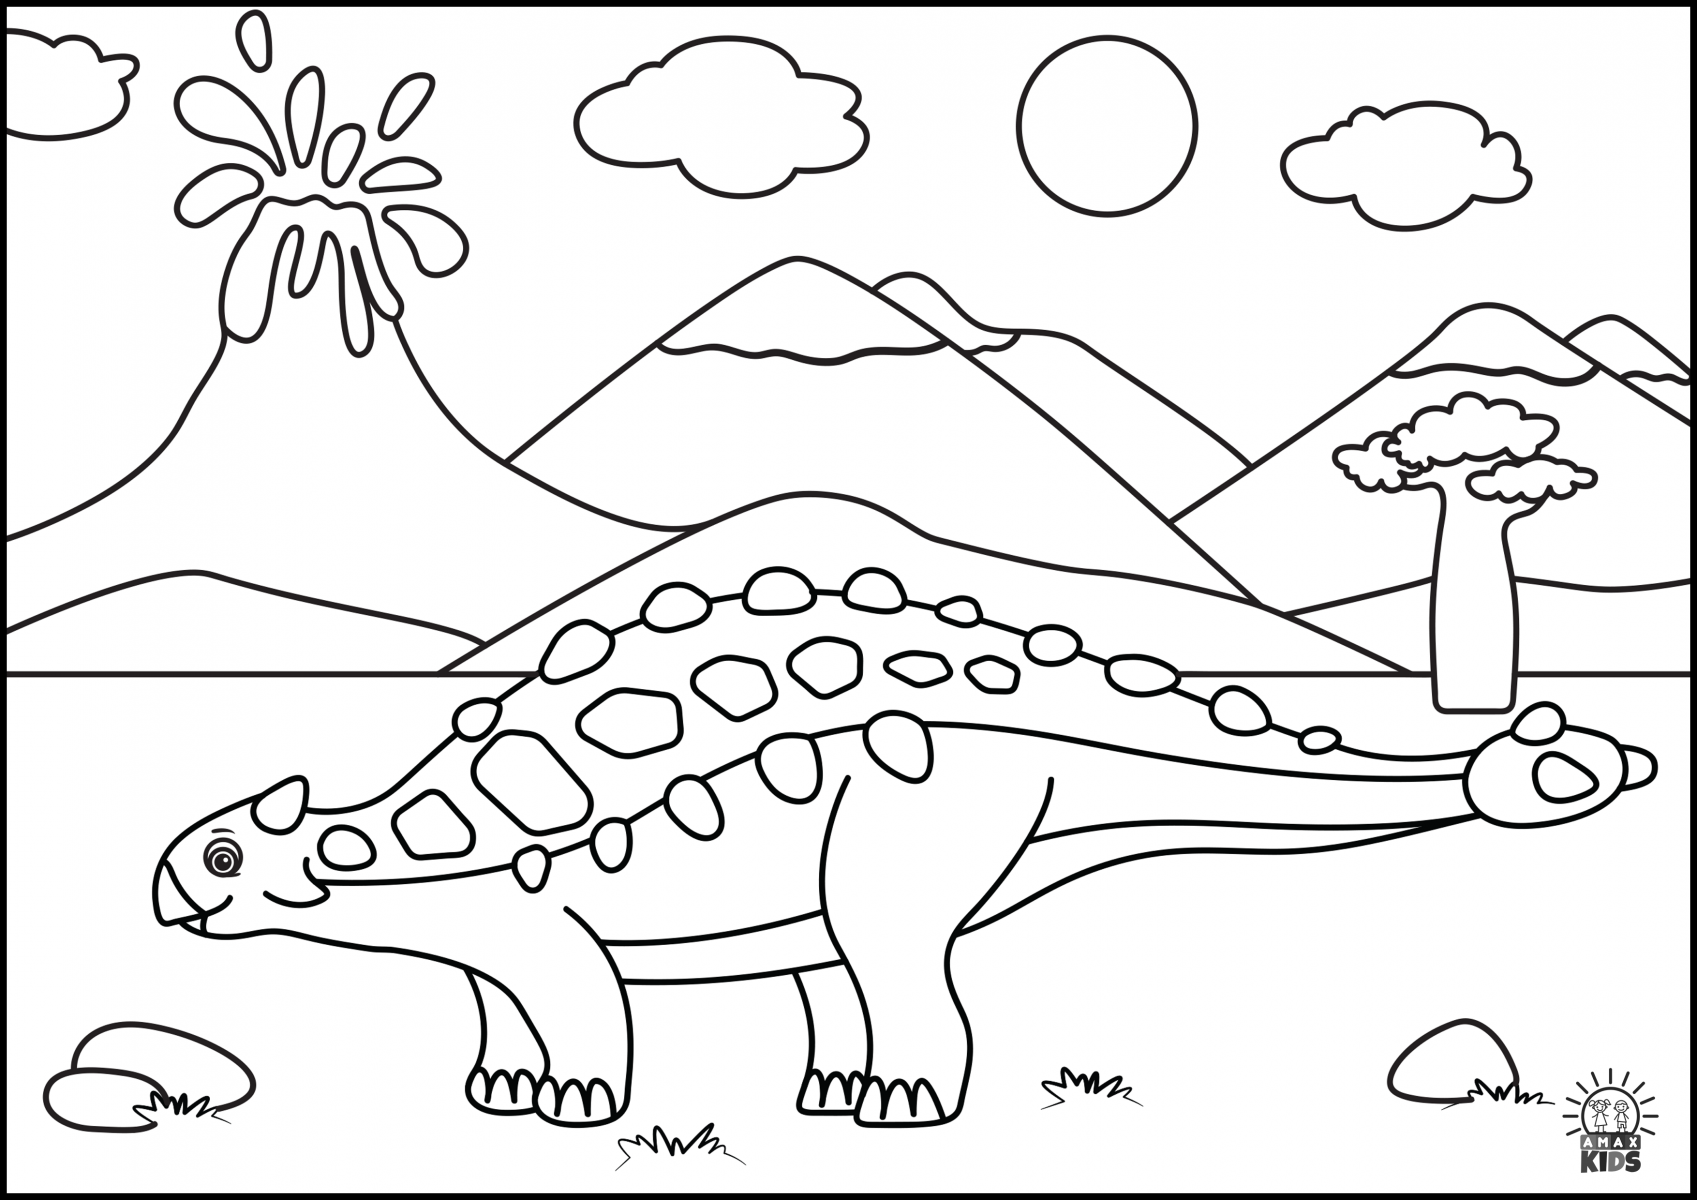 Download Coloring pages for kids with dinosaurs | Amax Kids